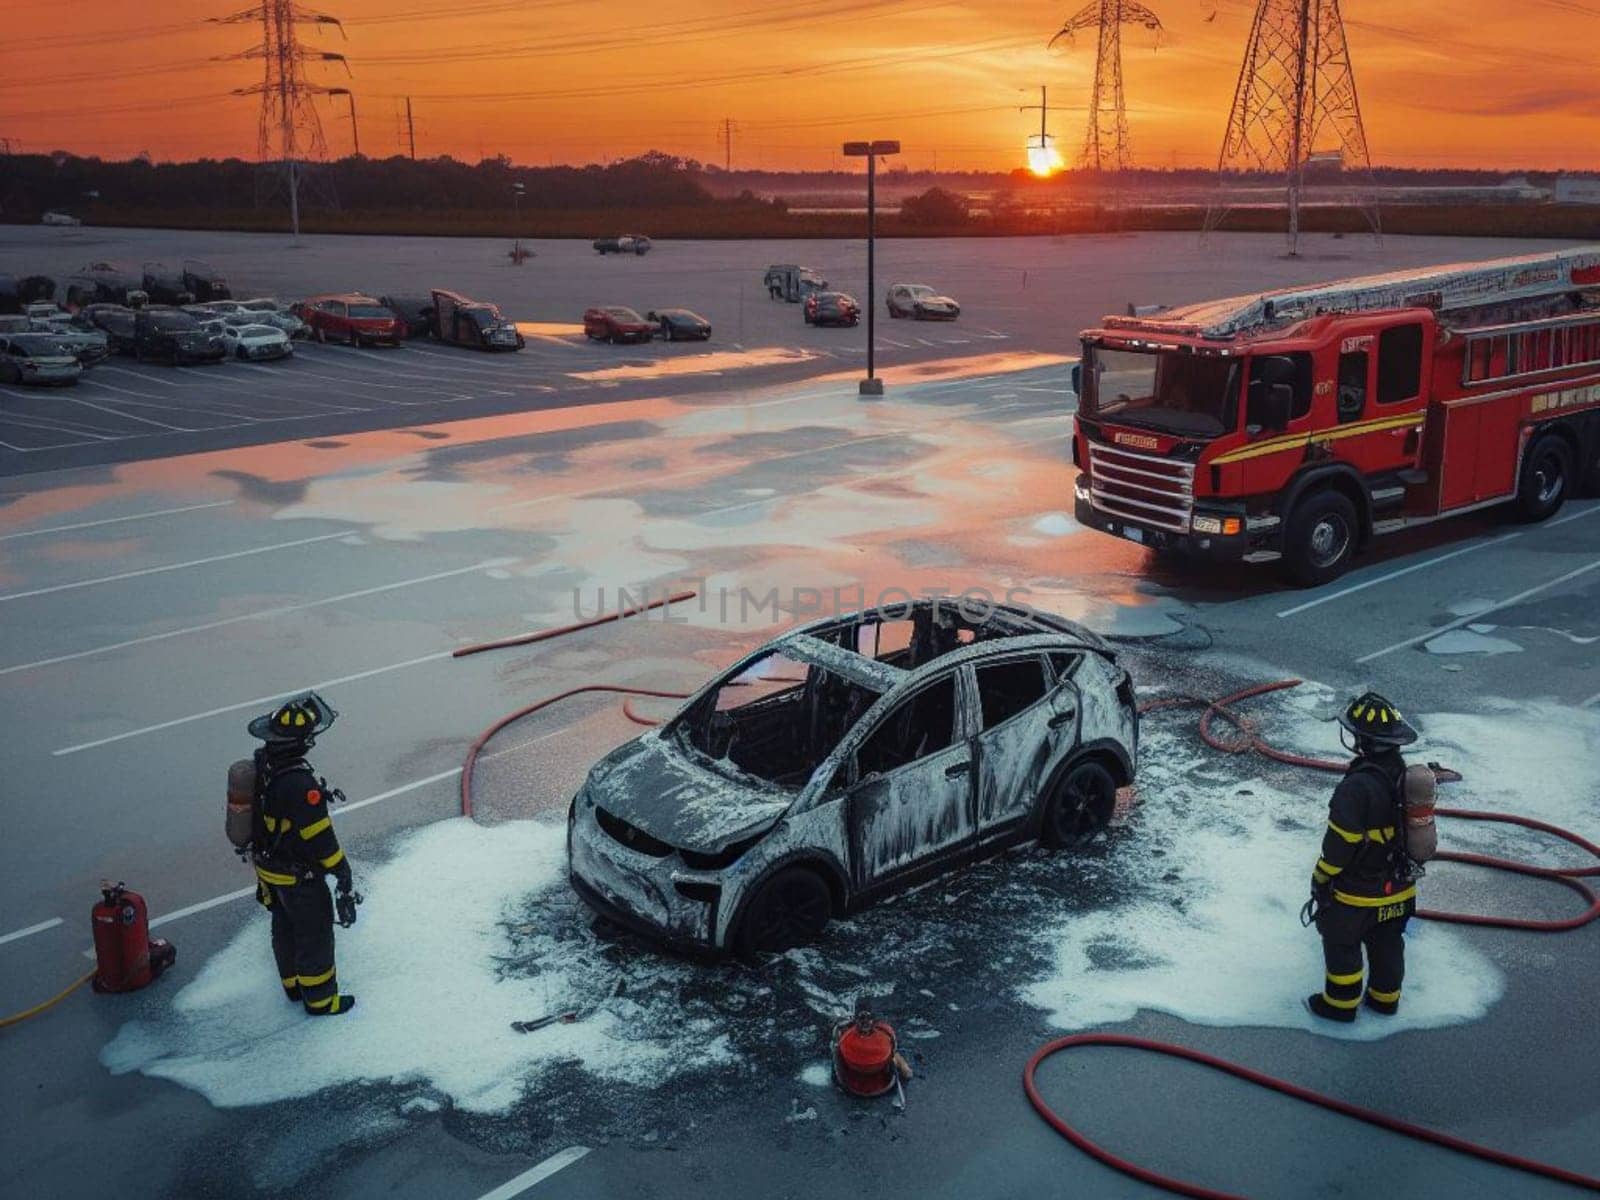 burned melted ev electric car, battery failure in parking lot, firefighter use foam to extinguish by verbano